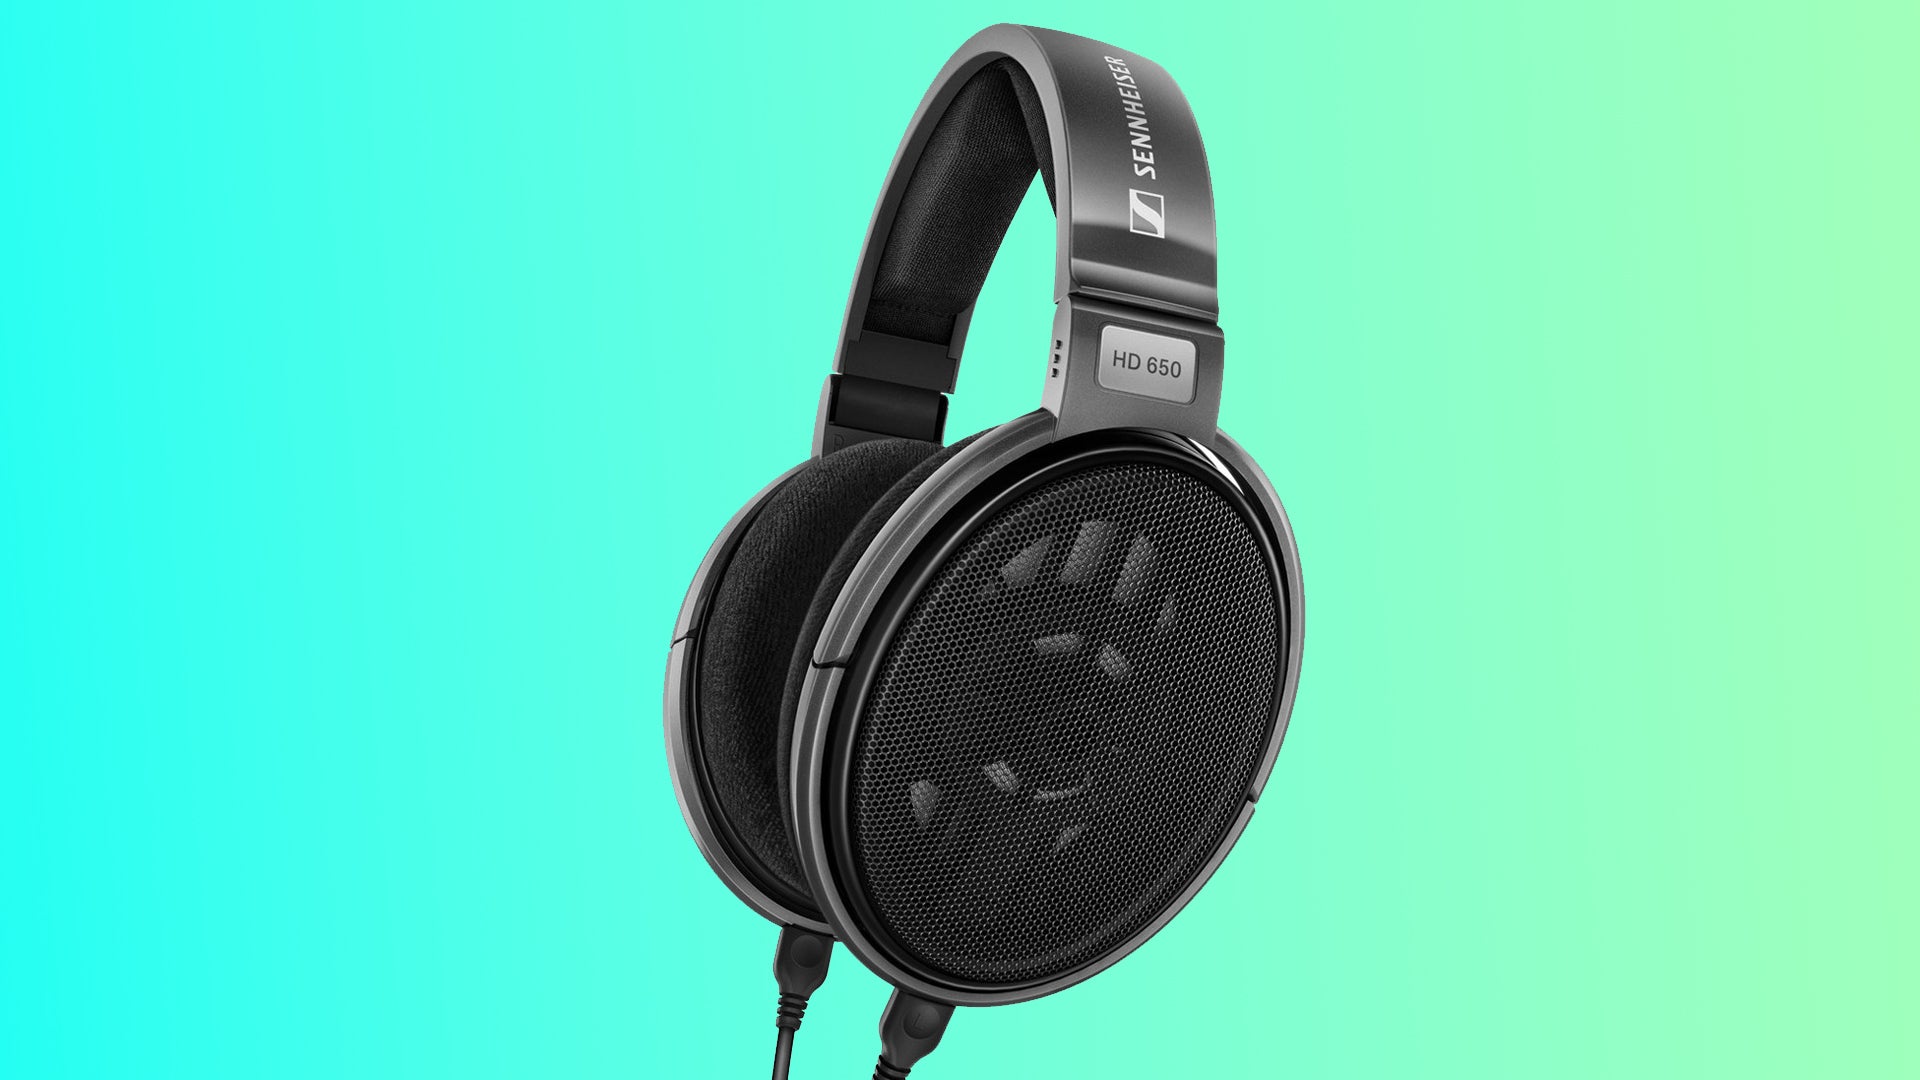 Sennheiser's immense HD 650 headphones are down to £229 from 